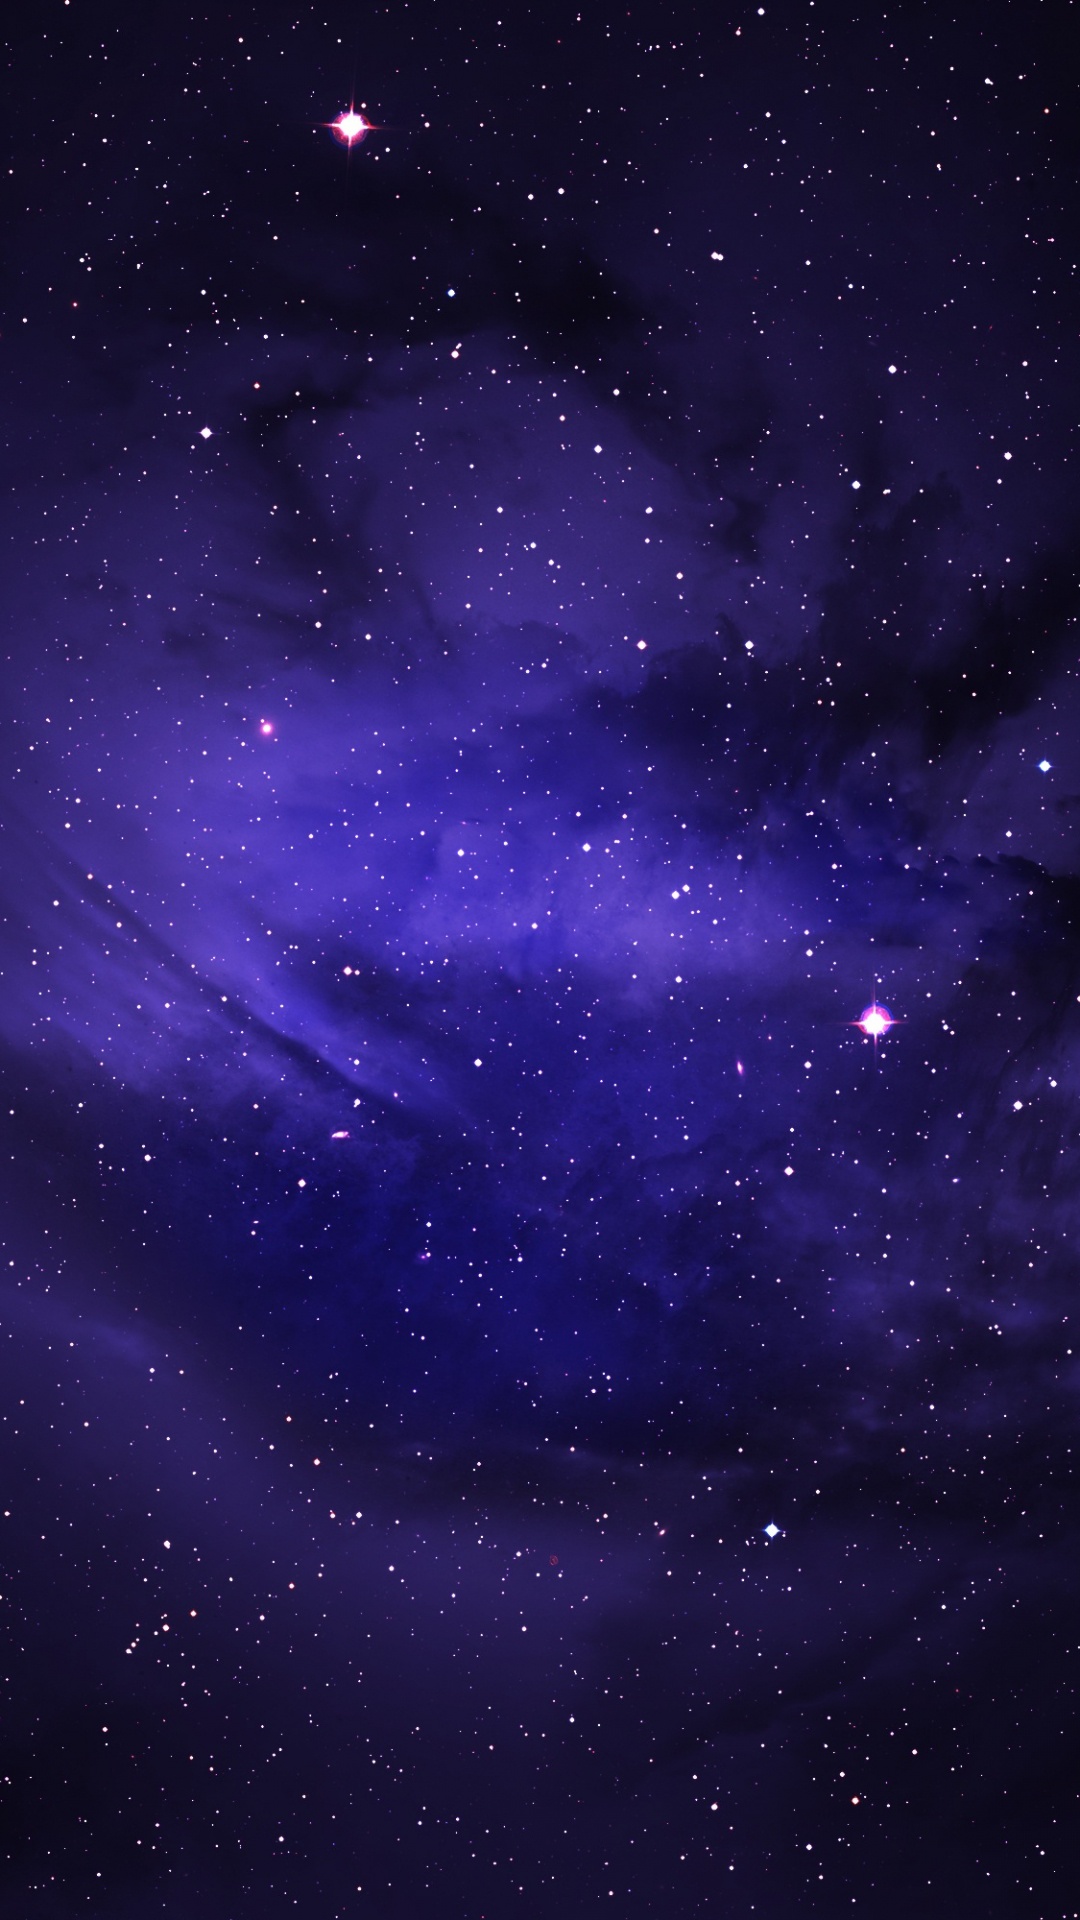 Purple and Black Galaxy Sky. Wallpaper in 1080x1920 Resolution